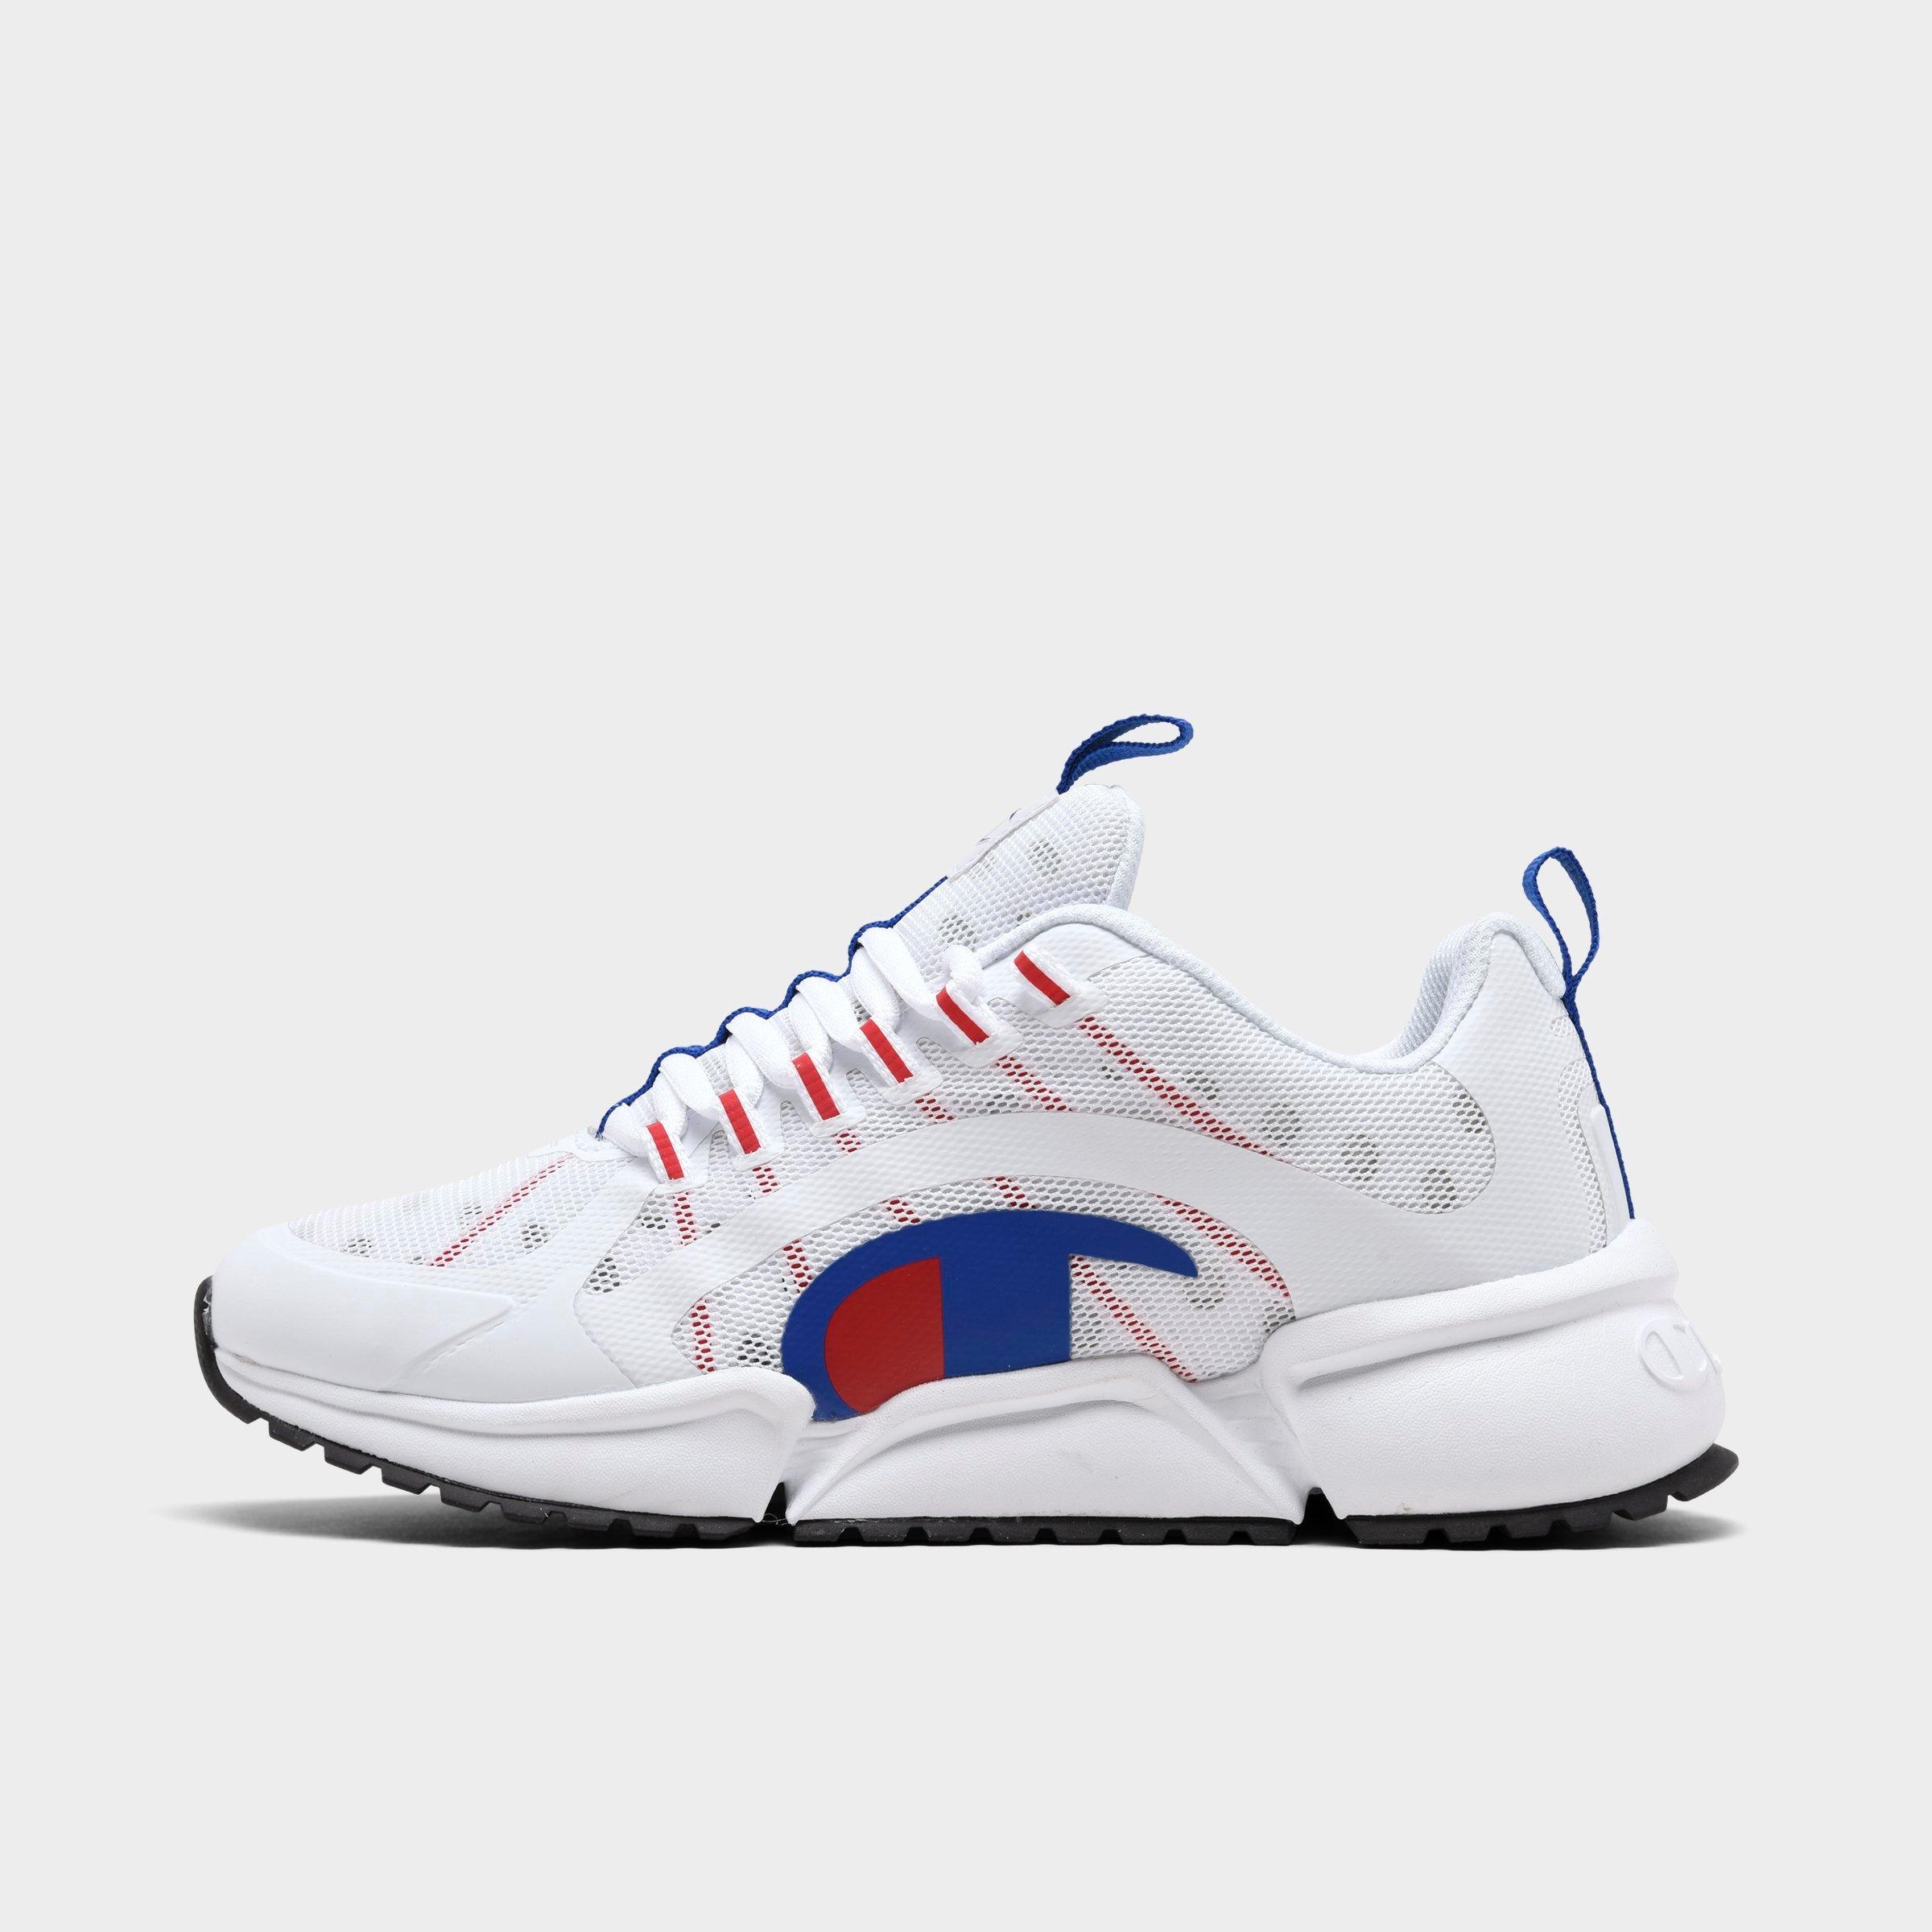 champion runner shoes